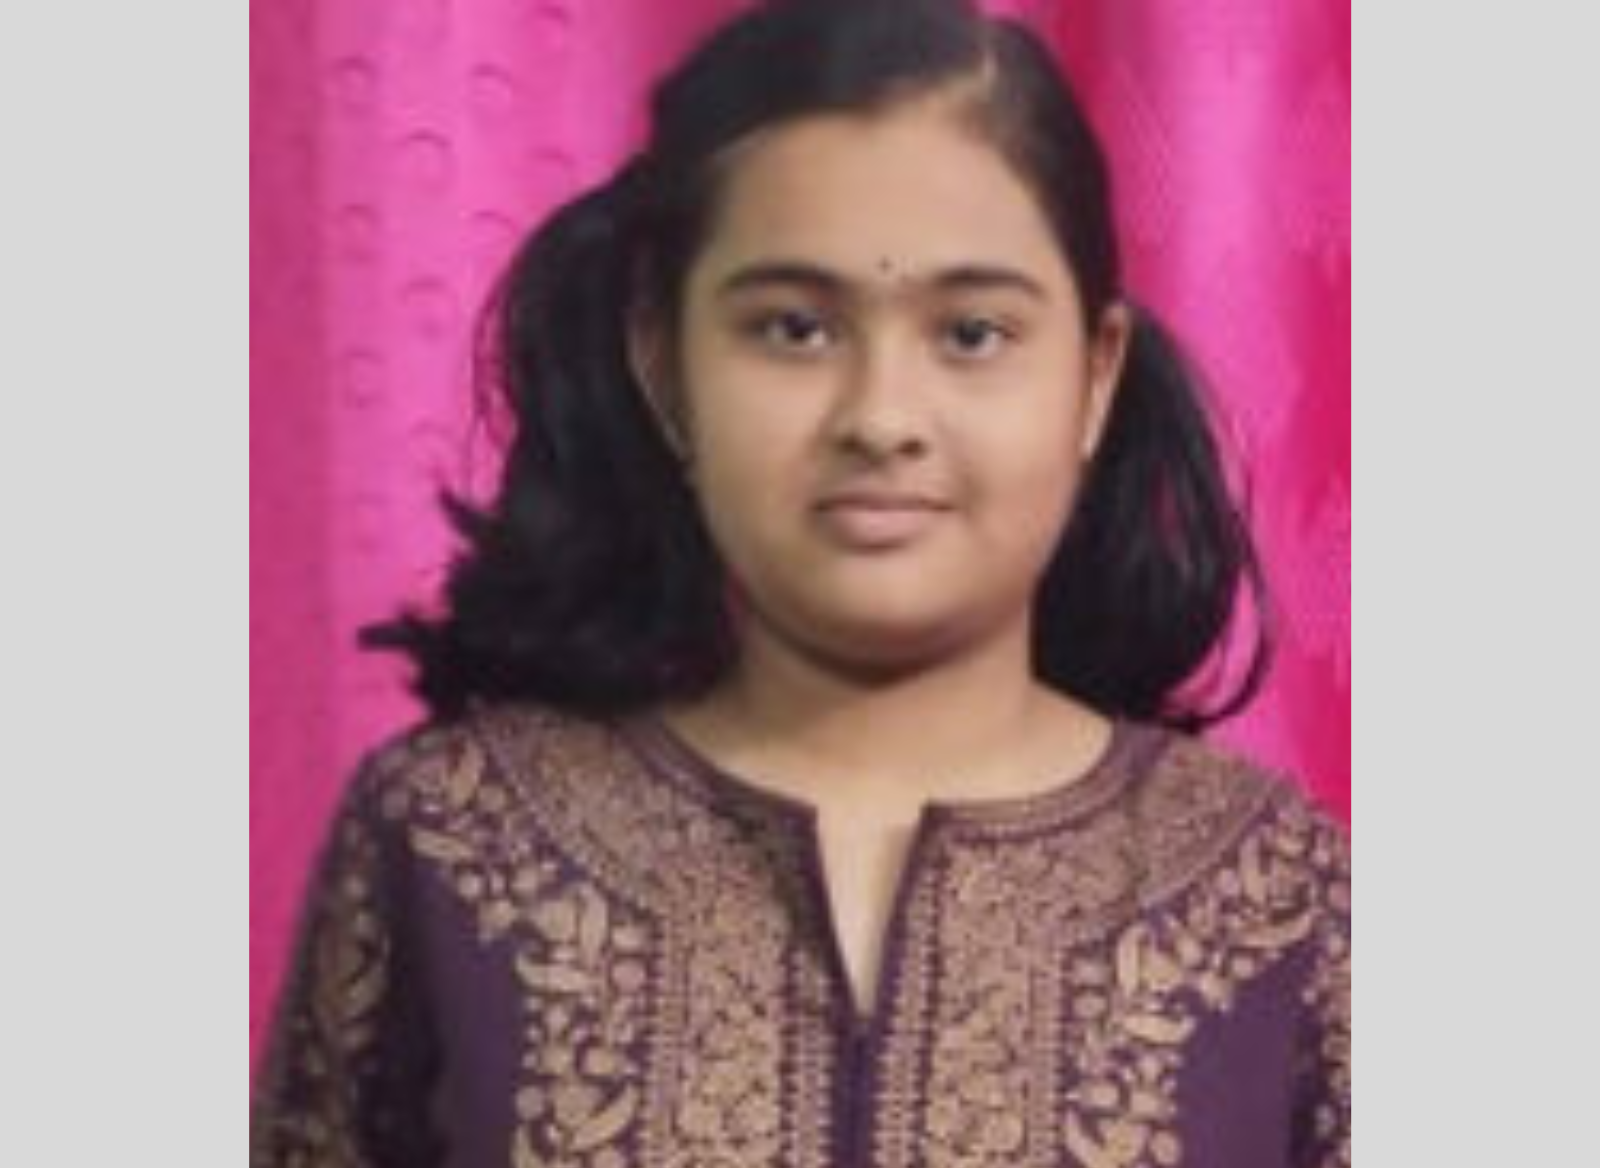 Harsita Priyadarshini Mohanty ,a student of Std VII from Koraput invited to join international consultation on preservation of traditional seeds event in Delhi.